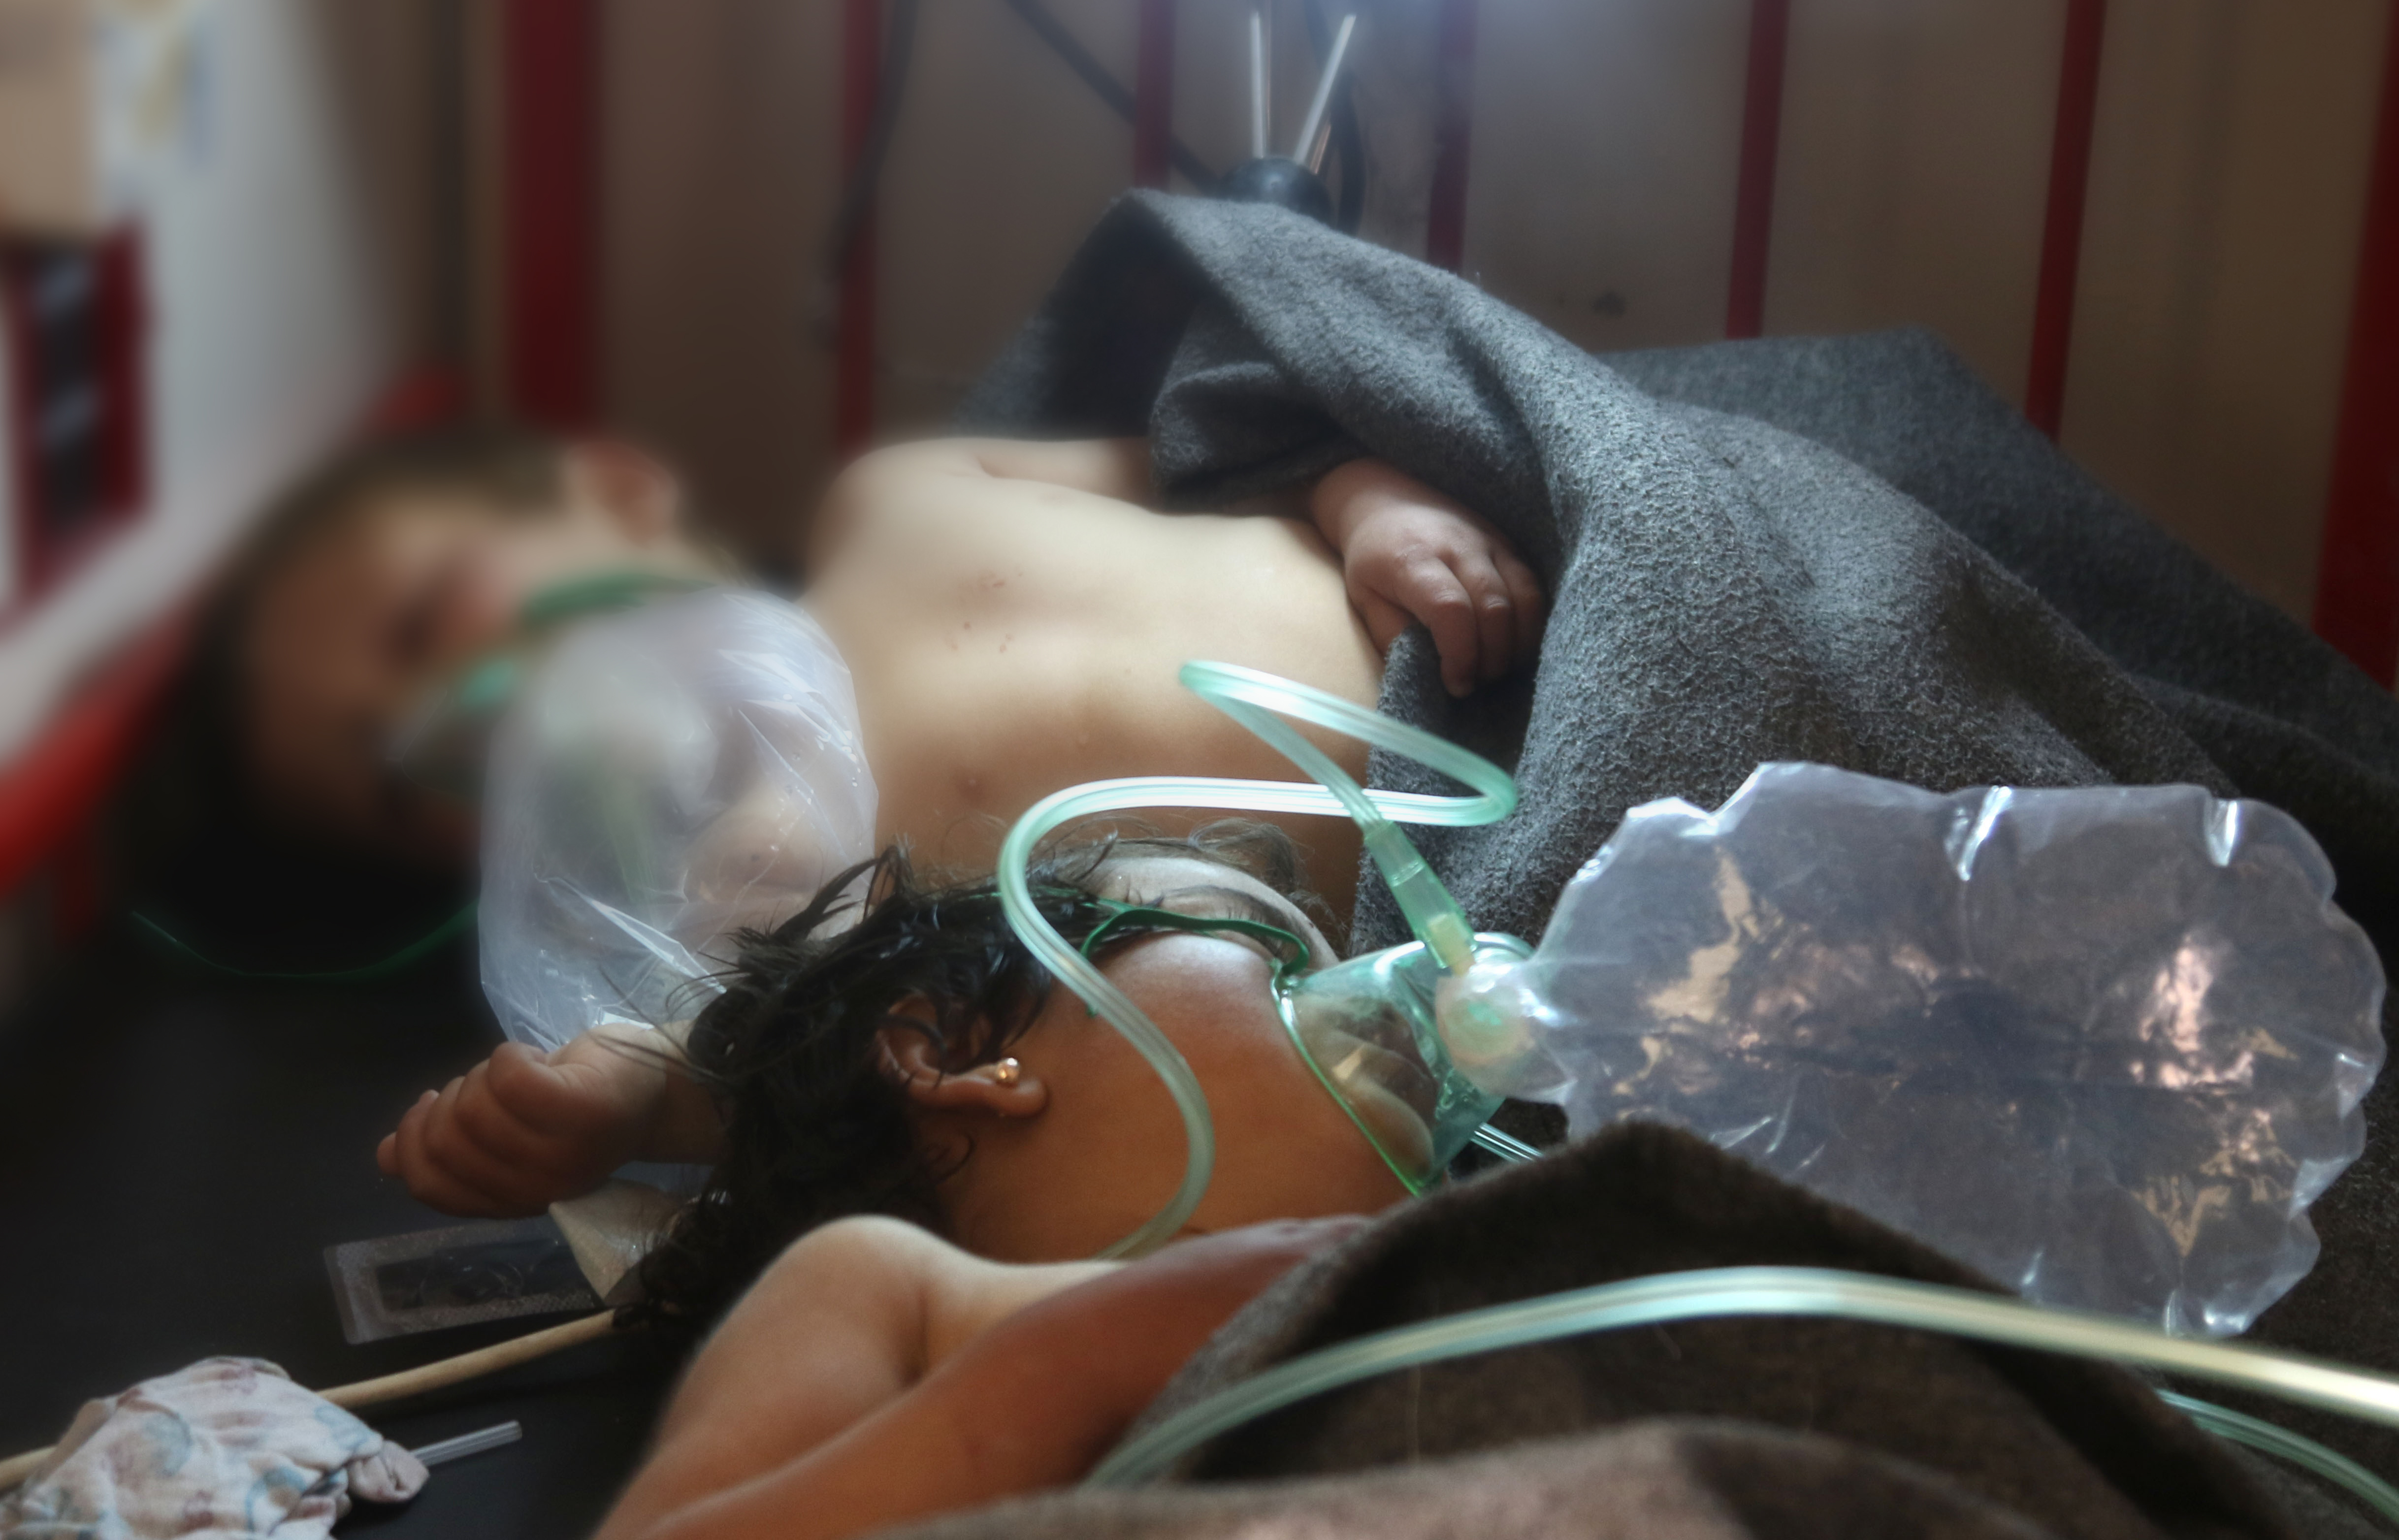 Syrian children receive treatment at a small hospital in the town of Maaret al-Noman following a suspected toxic gas attack in Khan Sheikhun, a nearby rebel-held town in Syrias northwestern Idlib province, on April 4, 2017. Warplanes carried out a suspected toxic gas attack that killed at least 35 people including several children, a monitoring group said. The Syrian Observatory for Human Rights said those killed in the town of Khan Sheikhun, in Idlib province, had died from the effects of the gas, adding that dozens more suffered respiratory problems and other symptoms. / AFP PHOTO / Mohamed al-Bakour / ADDING INFORMATION IN CAPTION (Photo credit should read MOHAMED AL-BAKOUR/AFP/Getty Images)